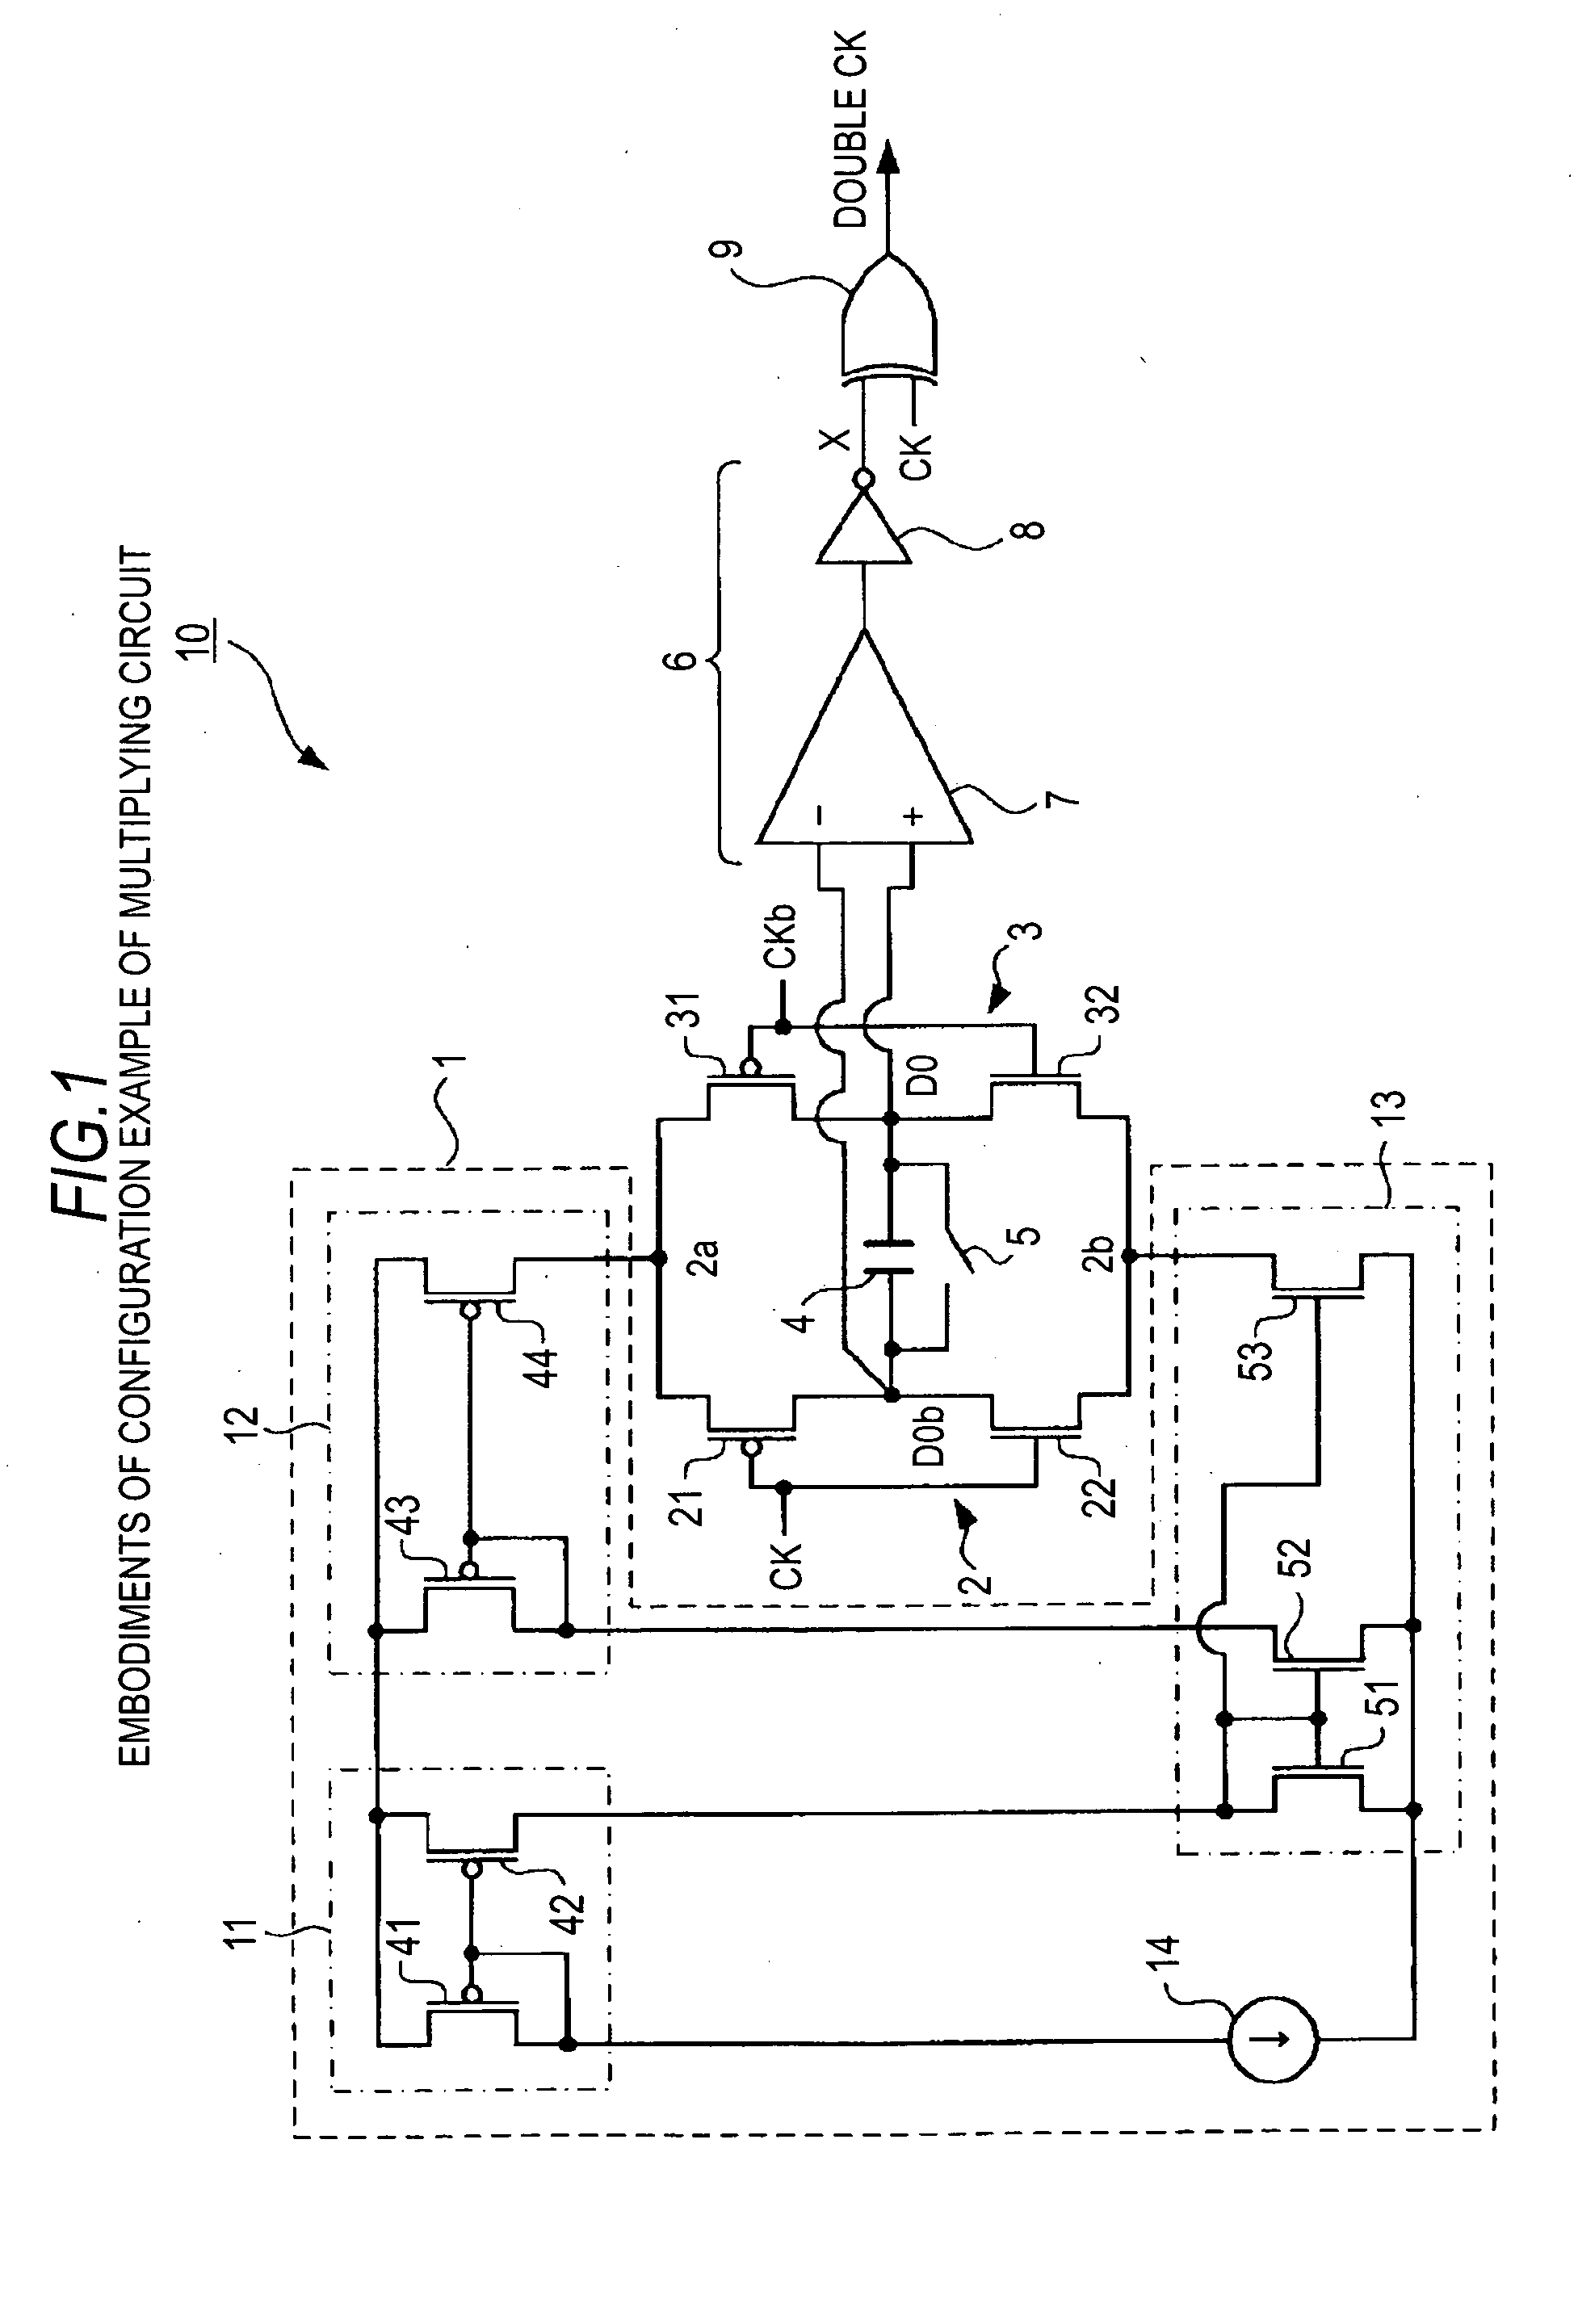 Clock multiplying circuit, solid-state imaging device, and phase-shift circuit